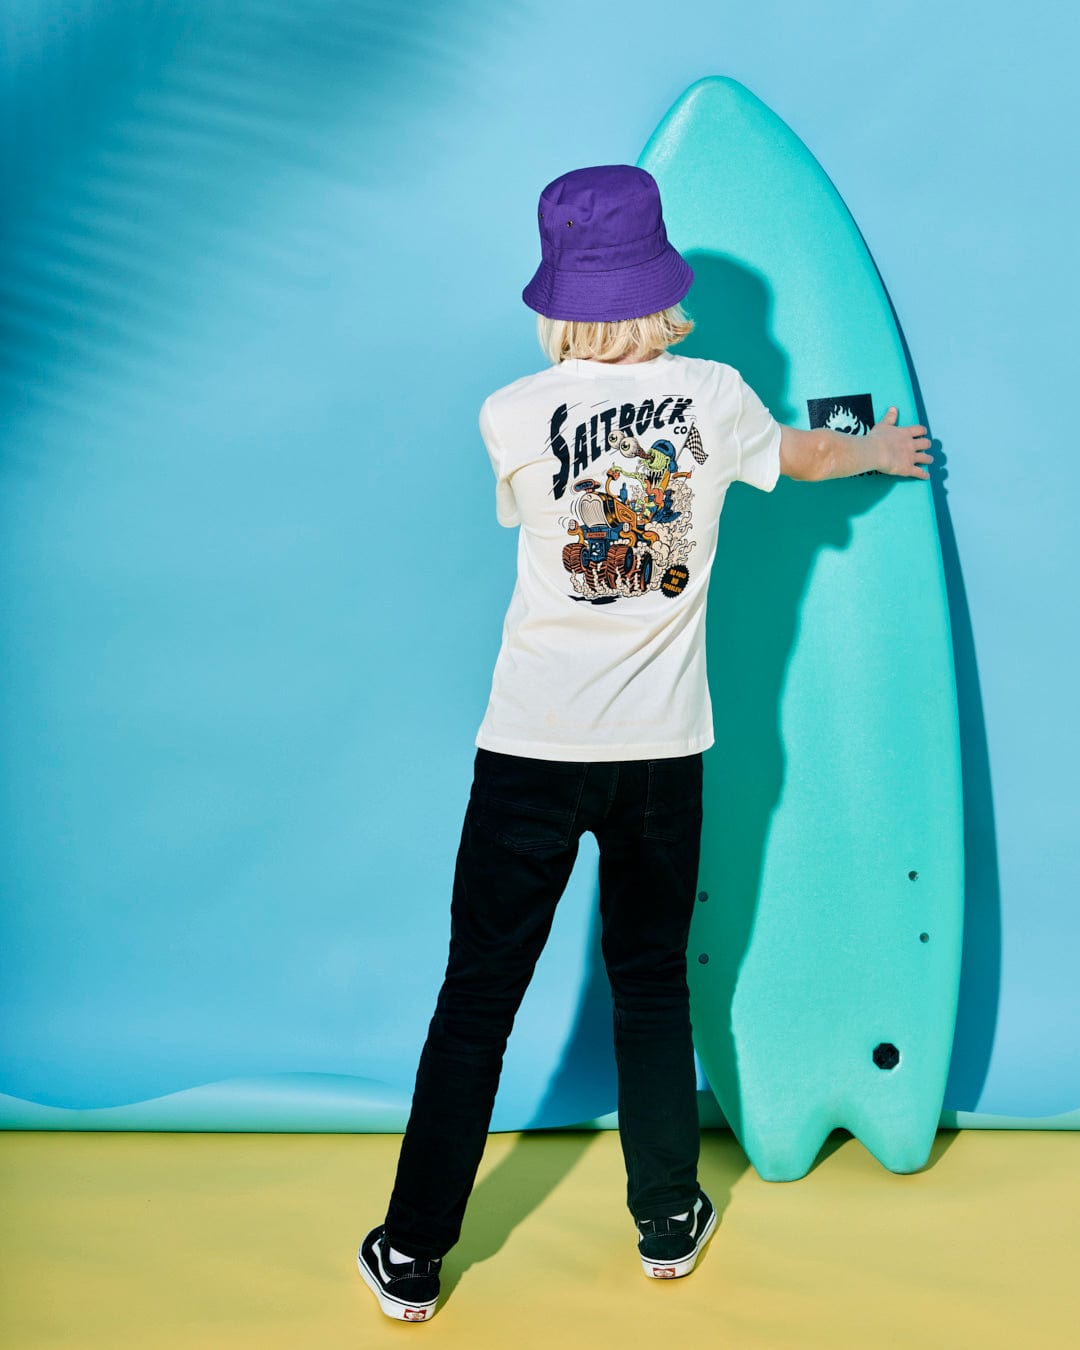 A person with blonde hair, wearing a purple bucket hat, black pants, and a white 100% cotton No Road No Problem - Kids Short Sleeve T-Shirt - White by Saltrock, stands facing a blue surfboard on a yellow and blue background.